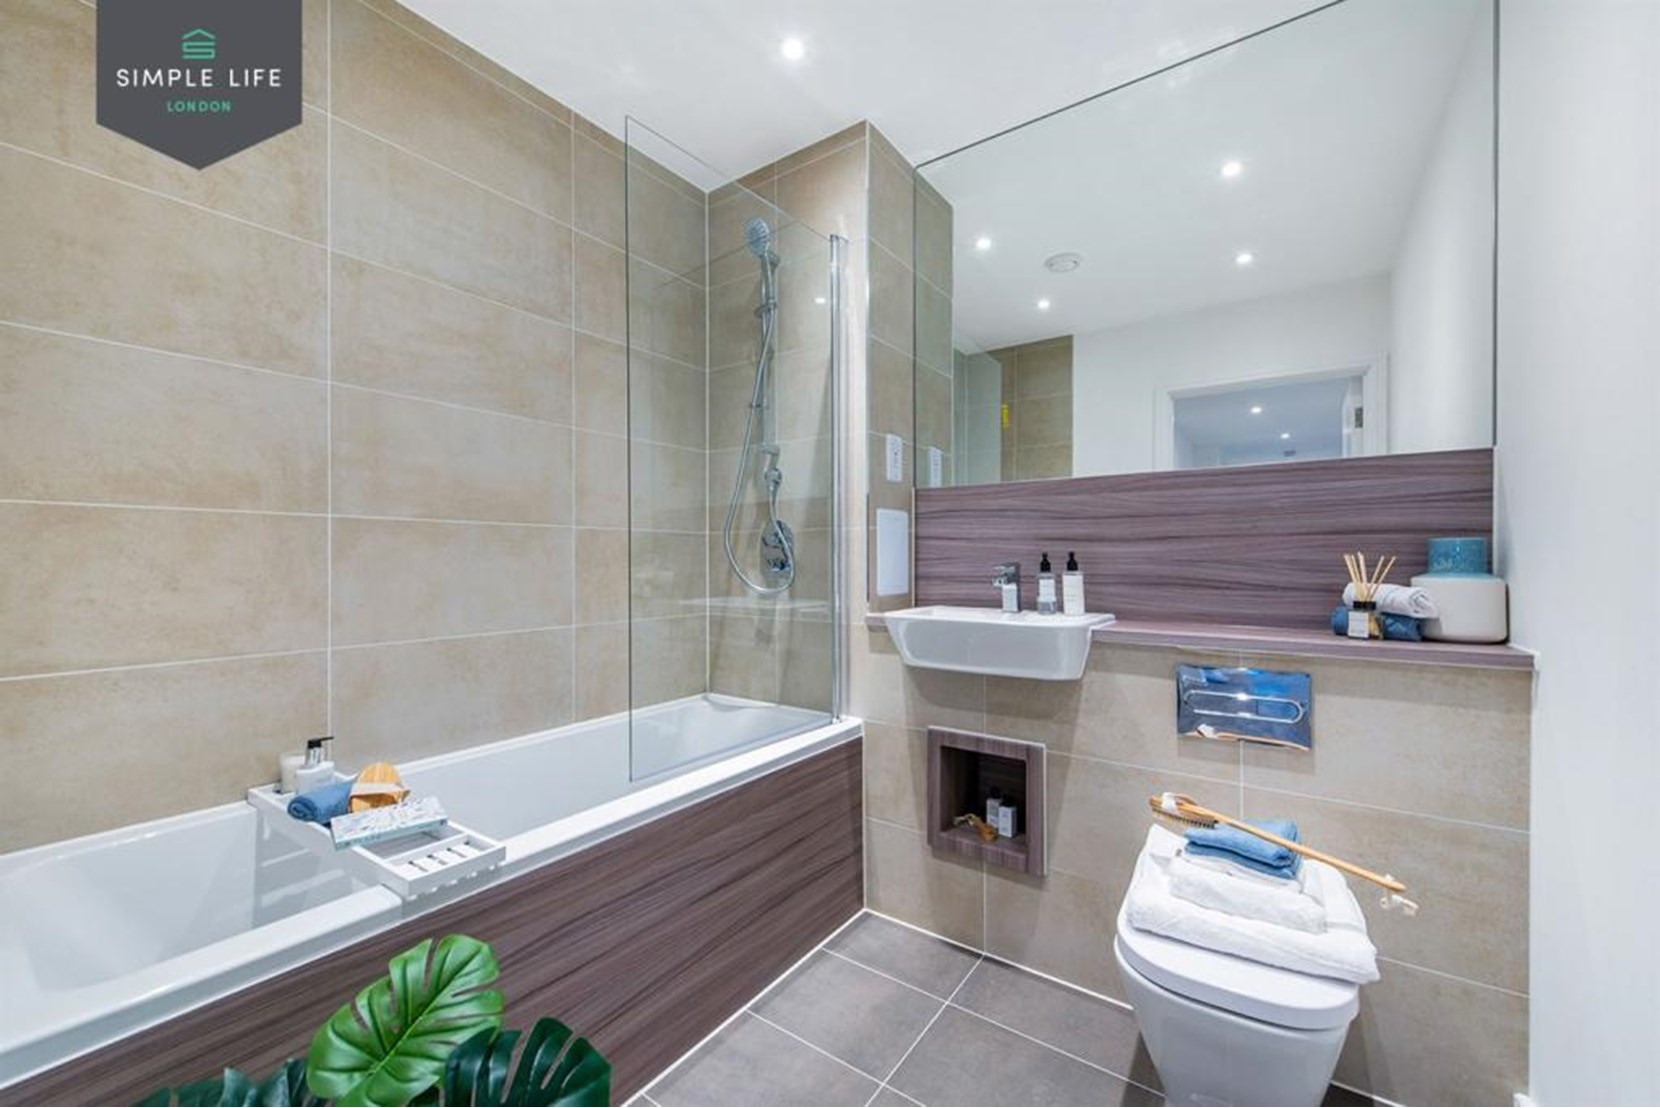 Apartments to Rent by Simple Life London in Beam Park, Havering, RM13, The Allegro bathroom